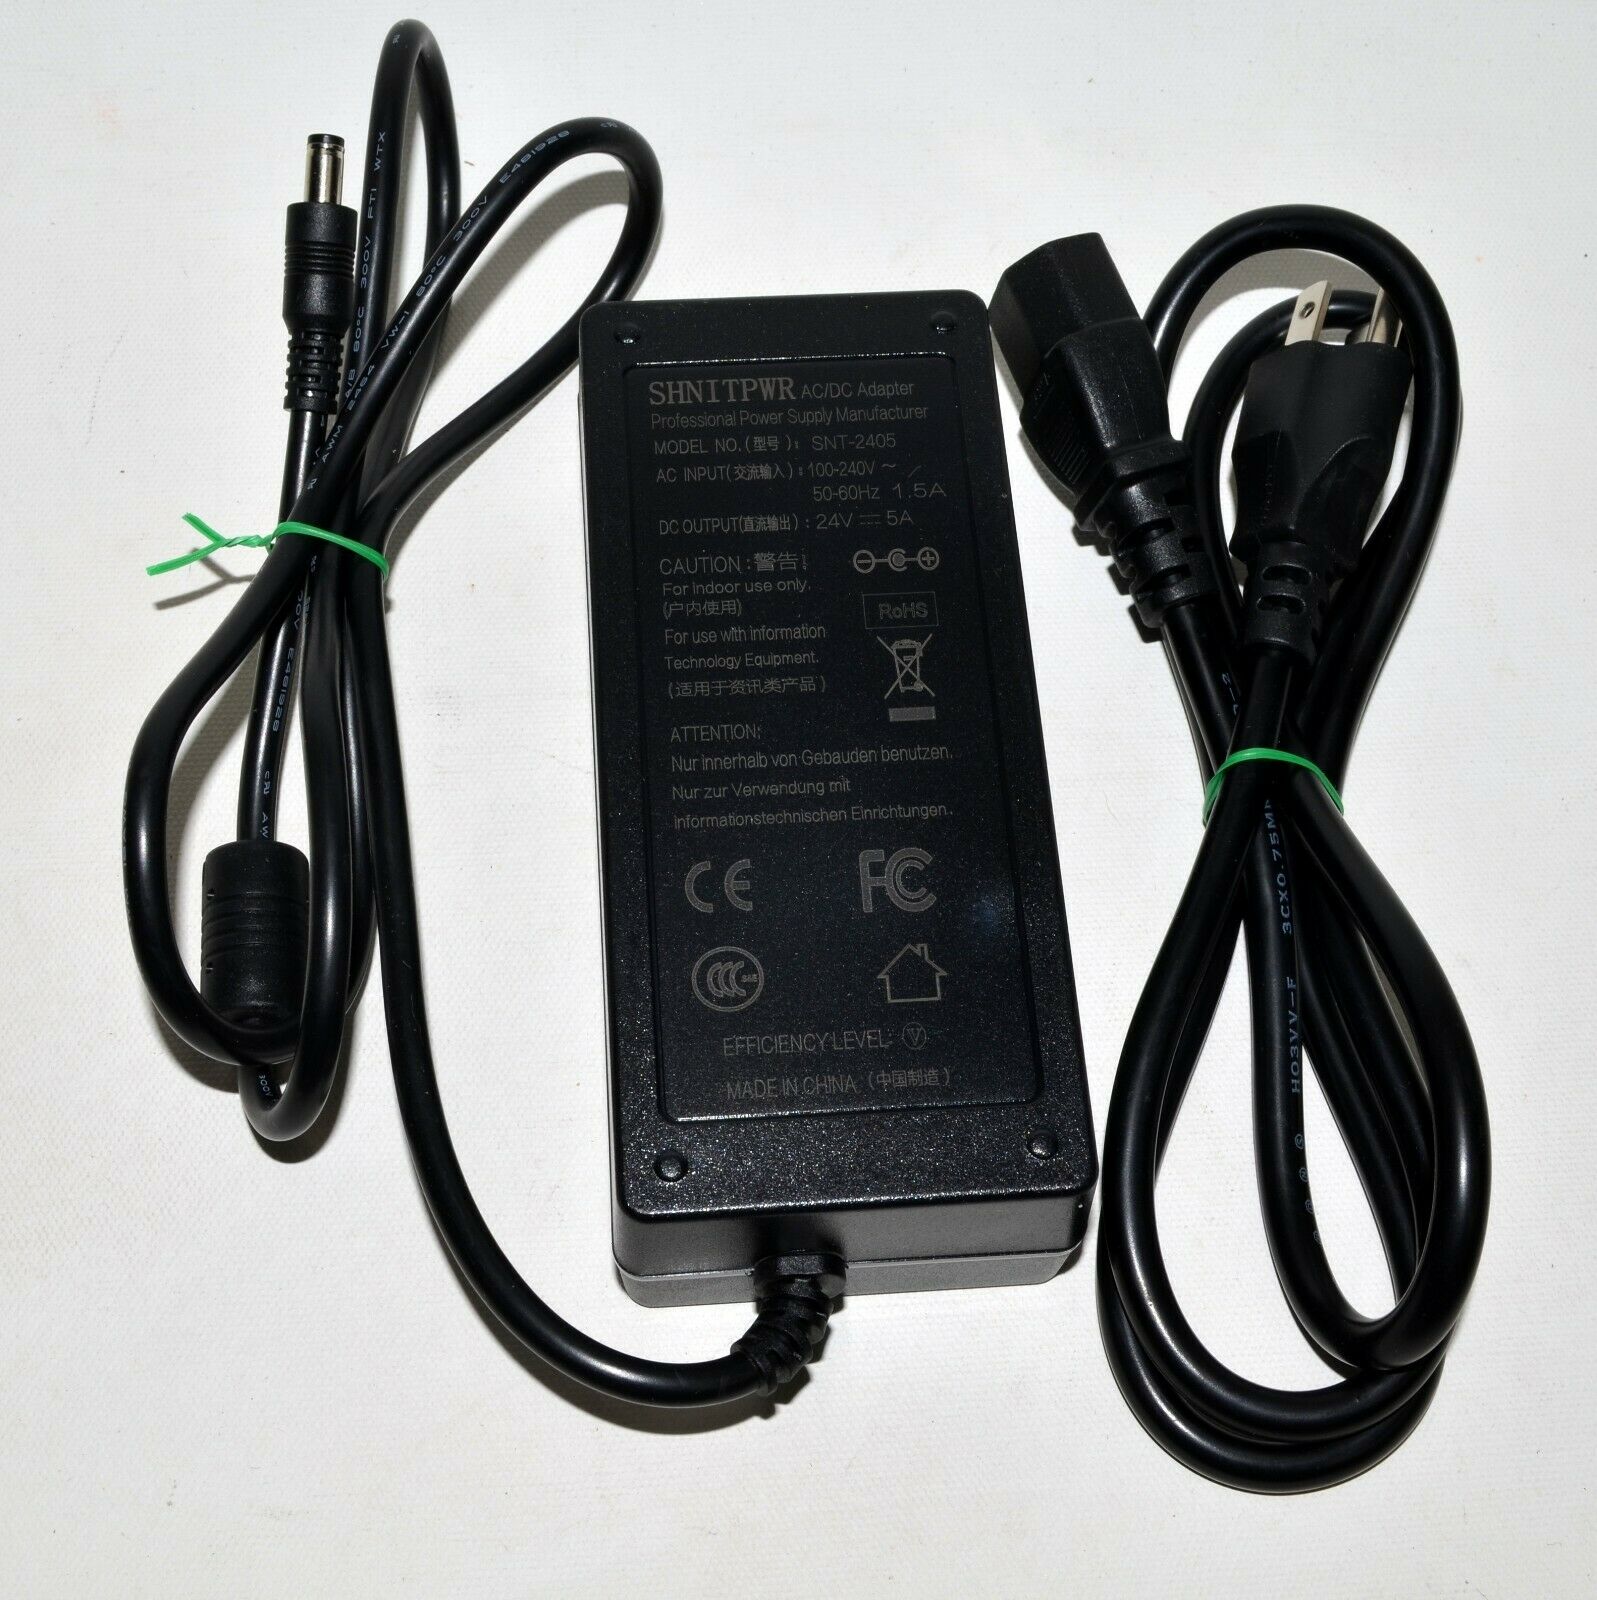 Shnitpwr ACDC Power Adapter Supply SNT-2405 24V 5A Compatible Brand: Universal Brand: Shnitpwr Type: AC/DC Adapter